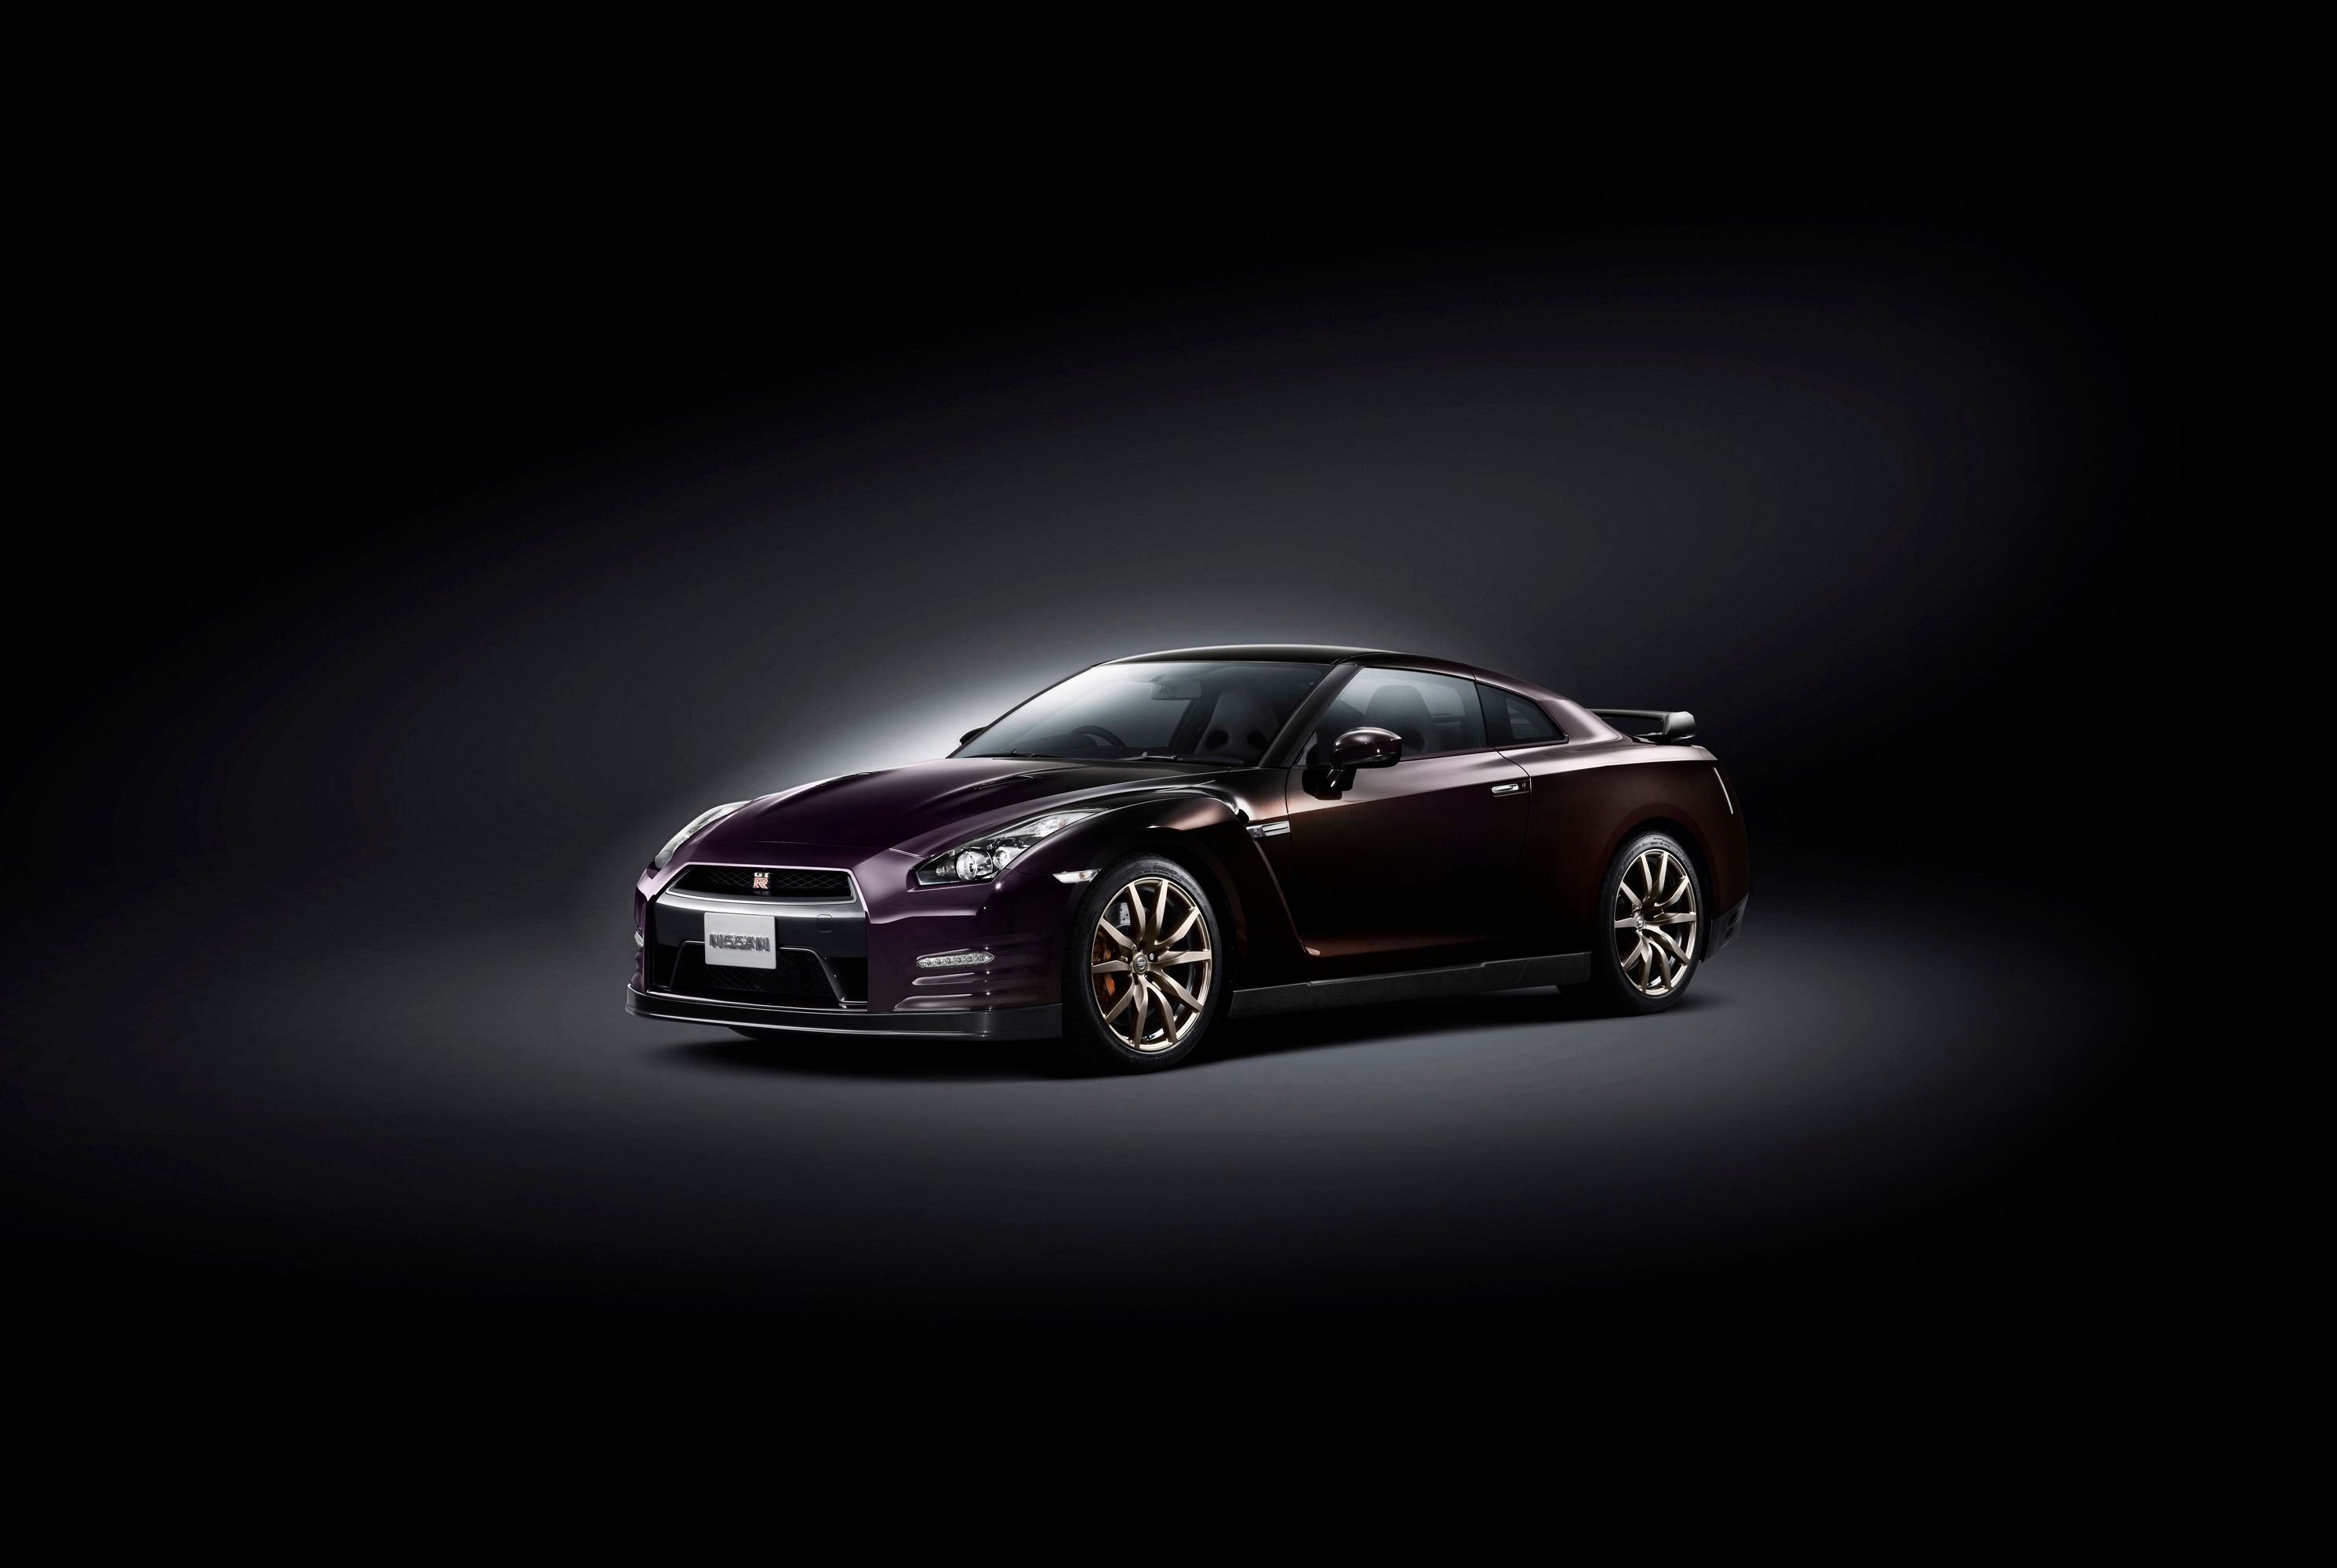 2014 Nissan GT-R Special Edition